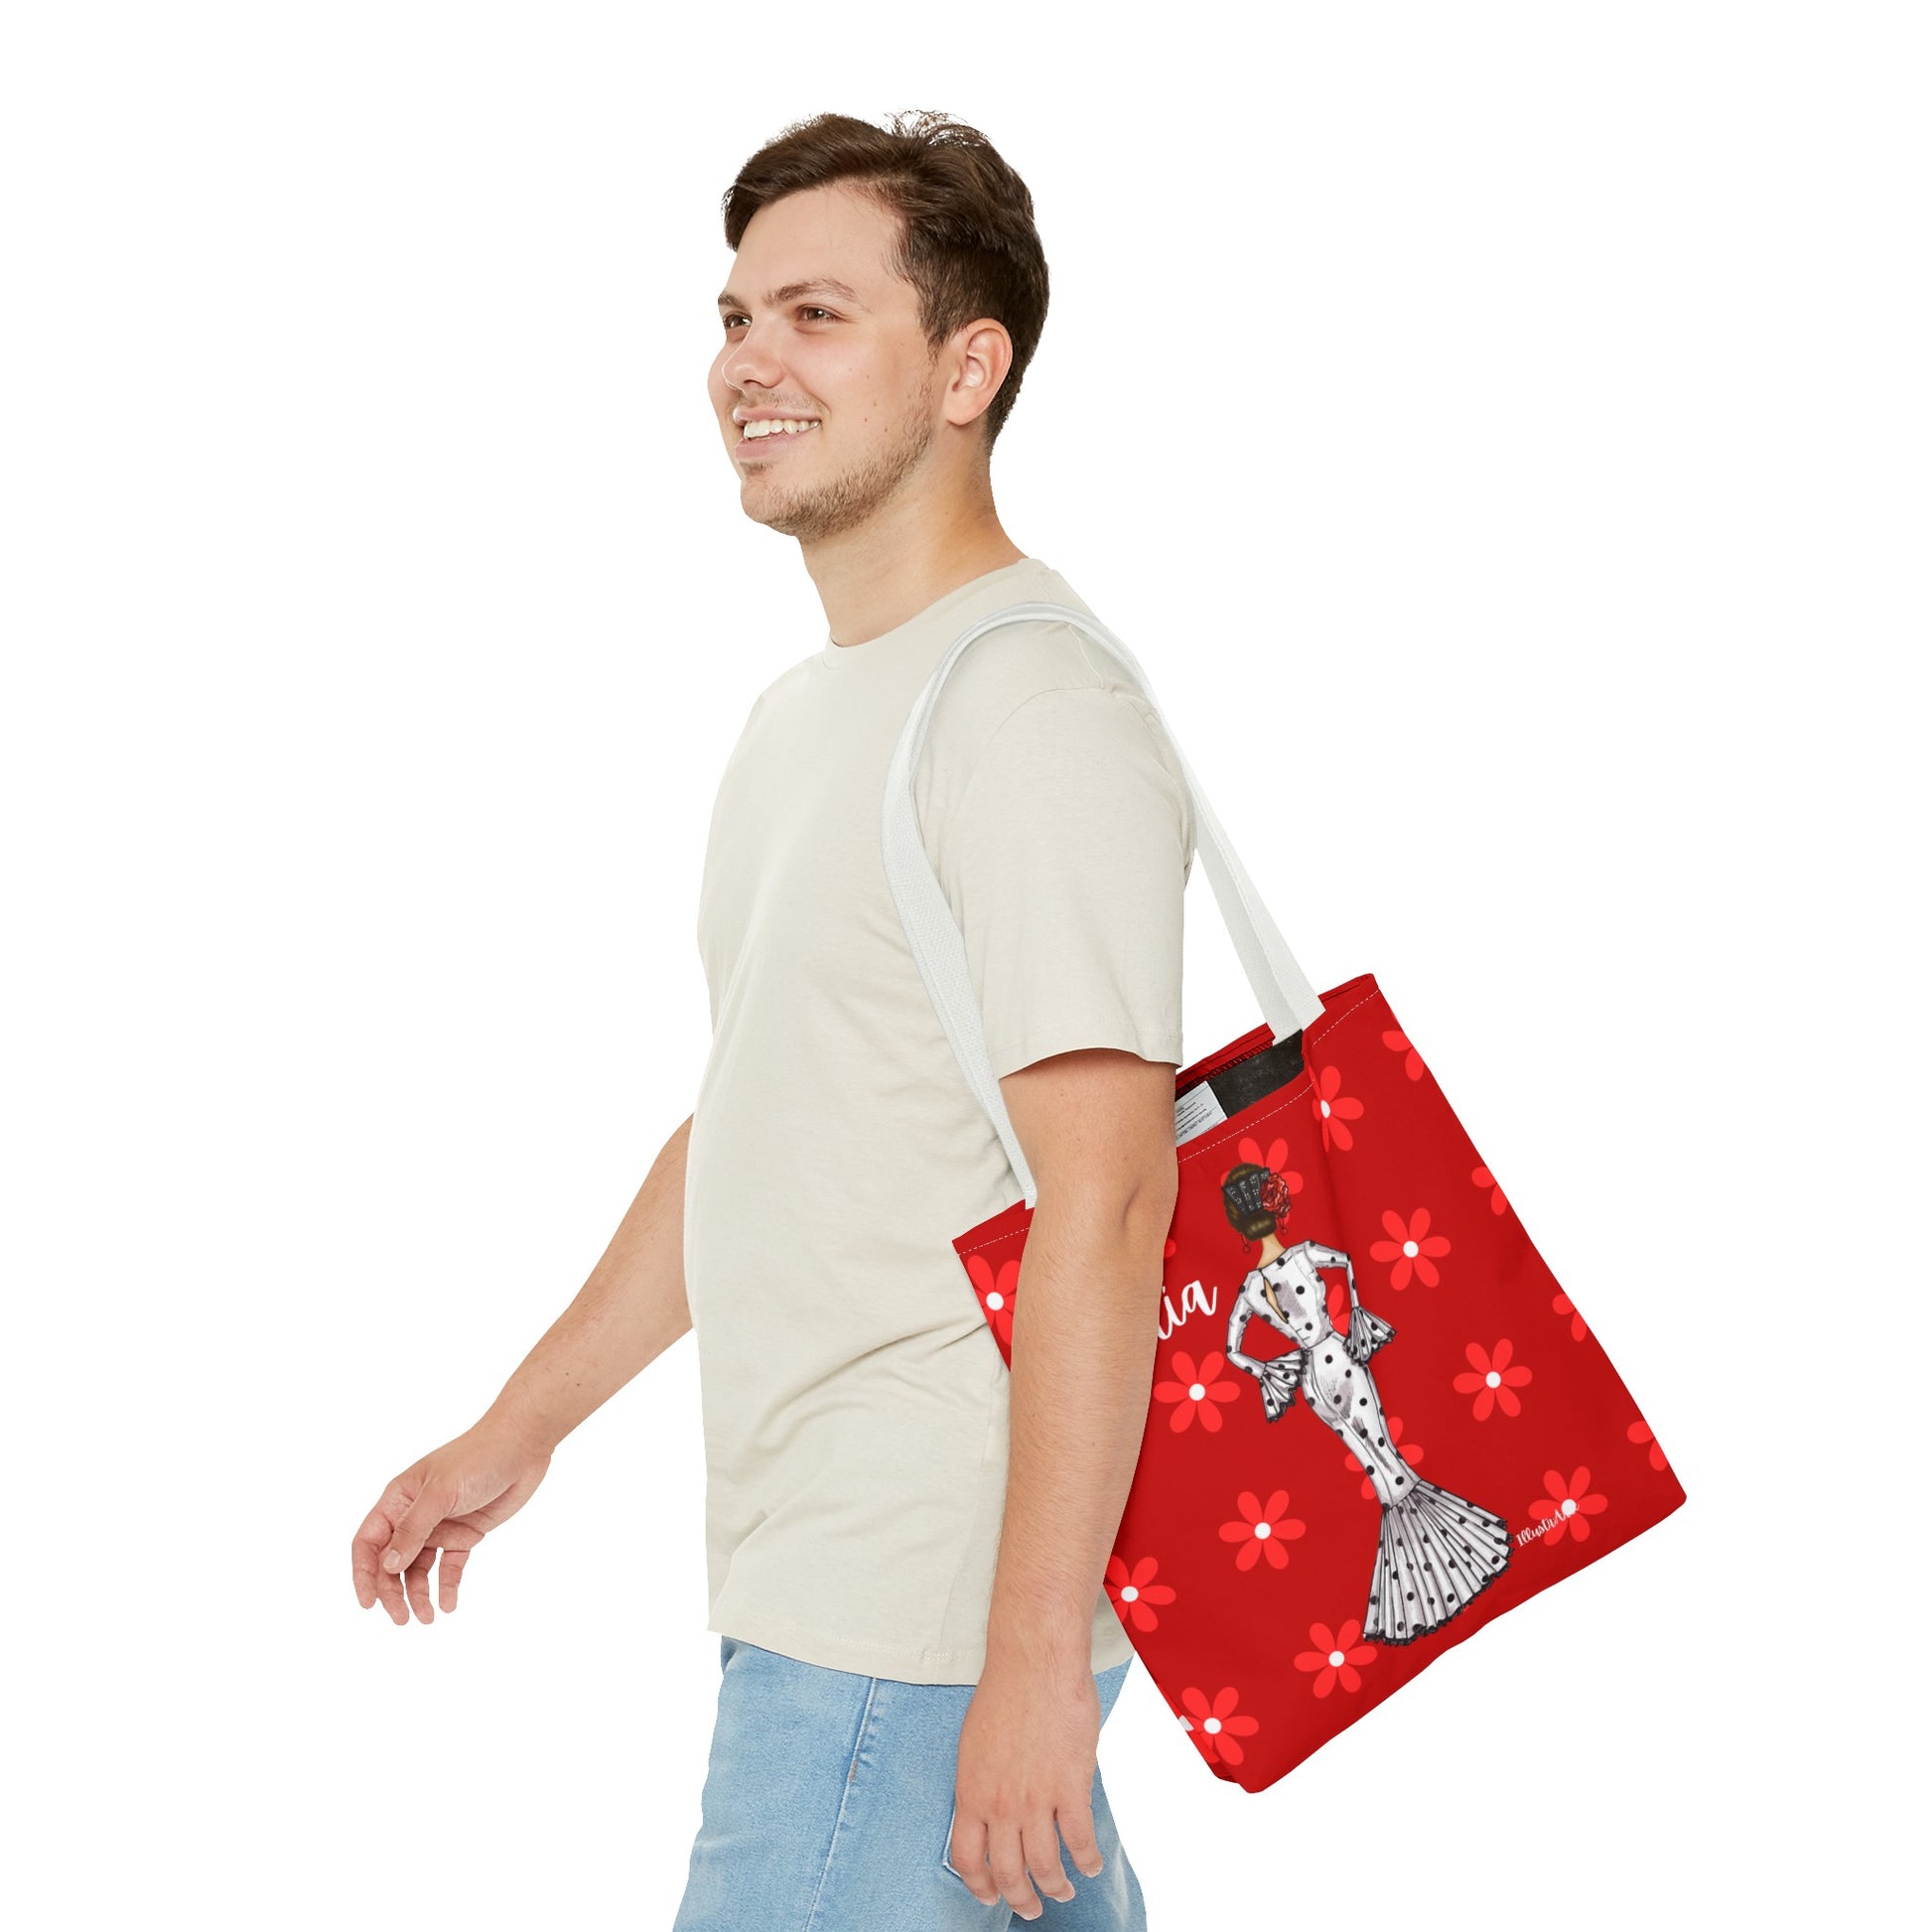 a man walking with a red bag on his back